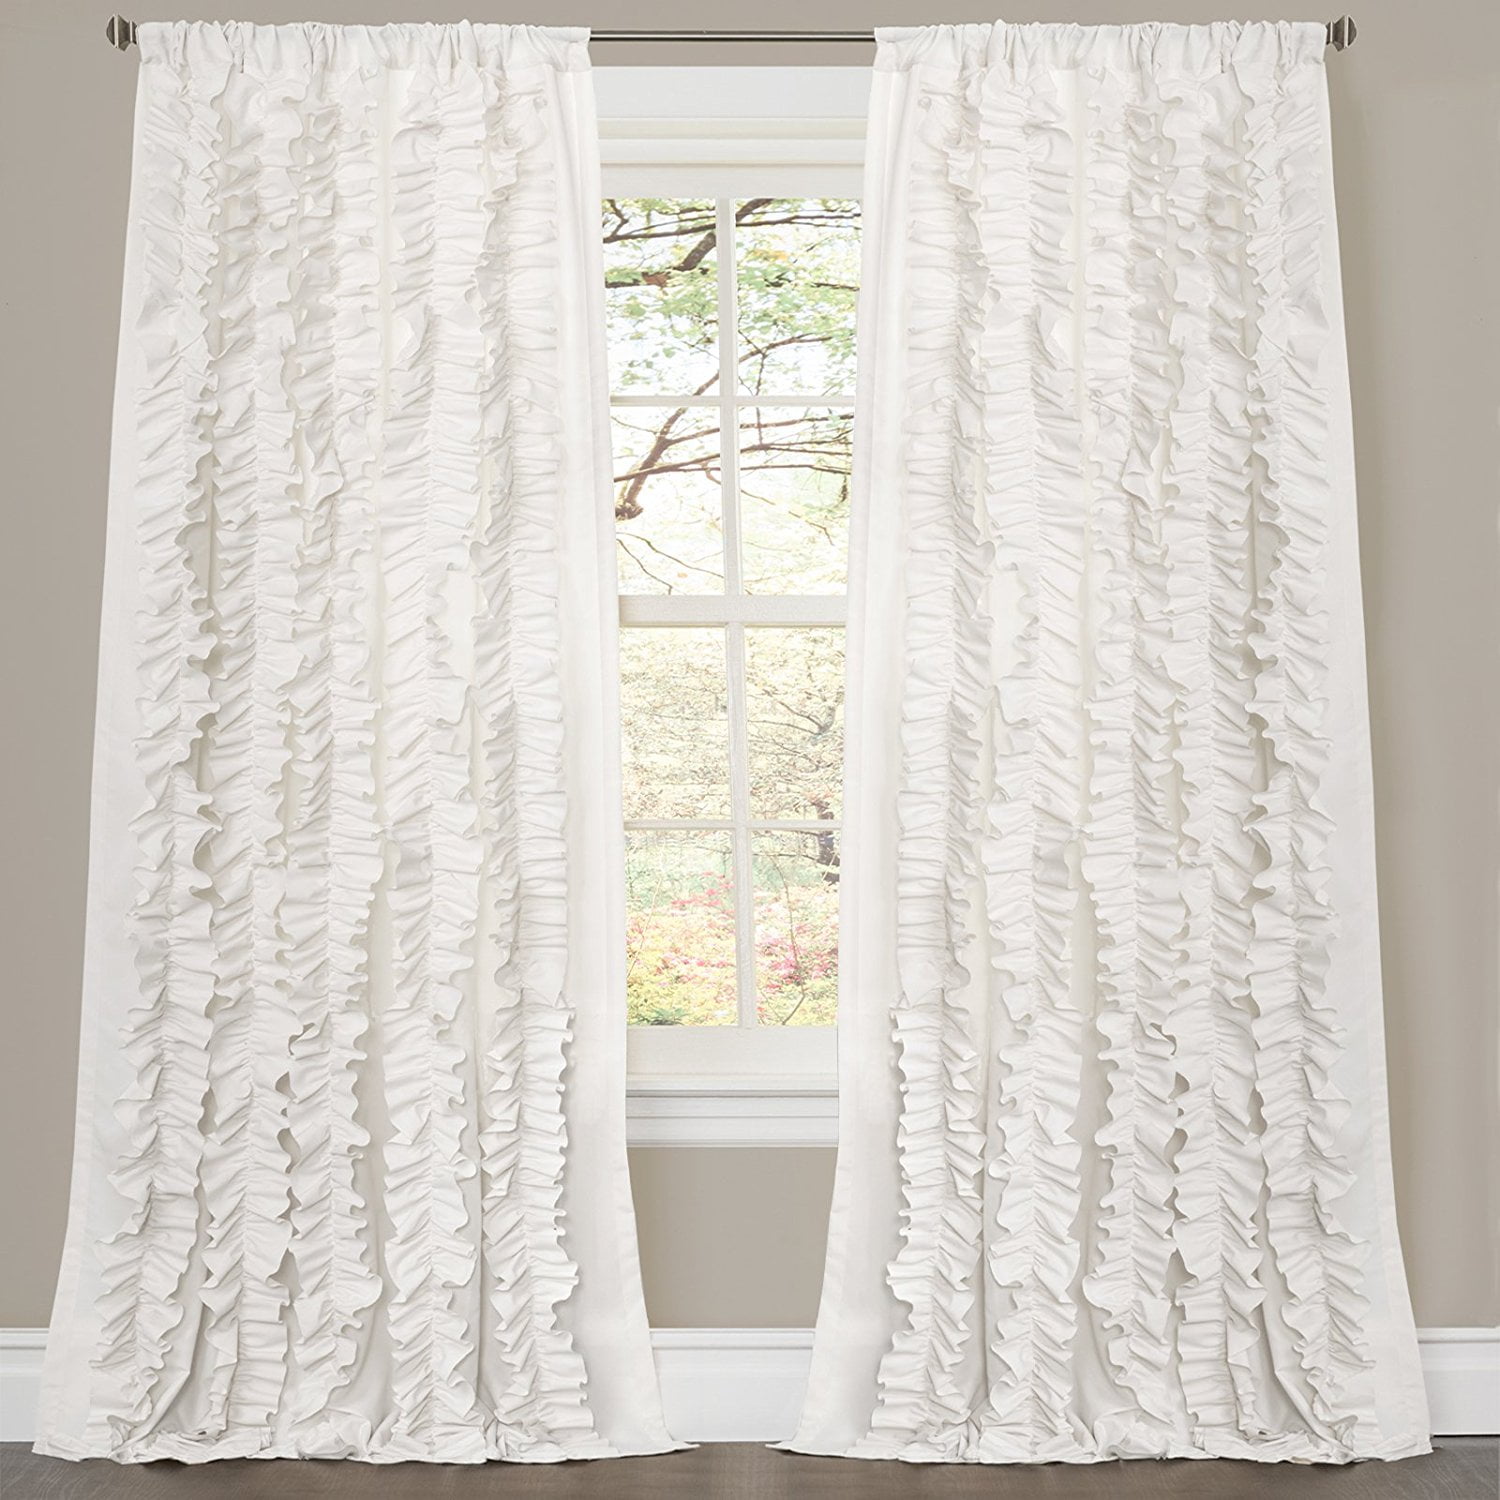 Lush Decor Belle Window Valance 18" x 84" White Ruffles New In Package 